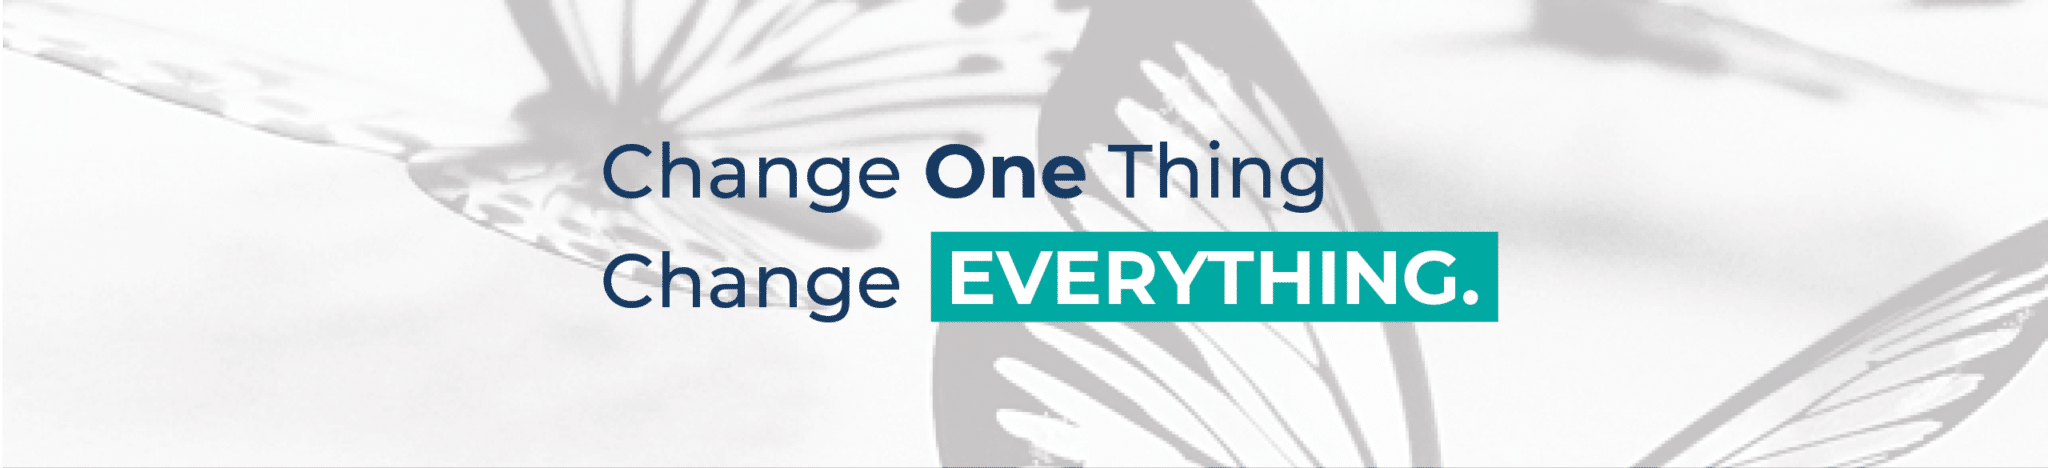 change one thing, change everything.